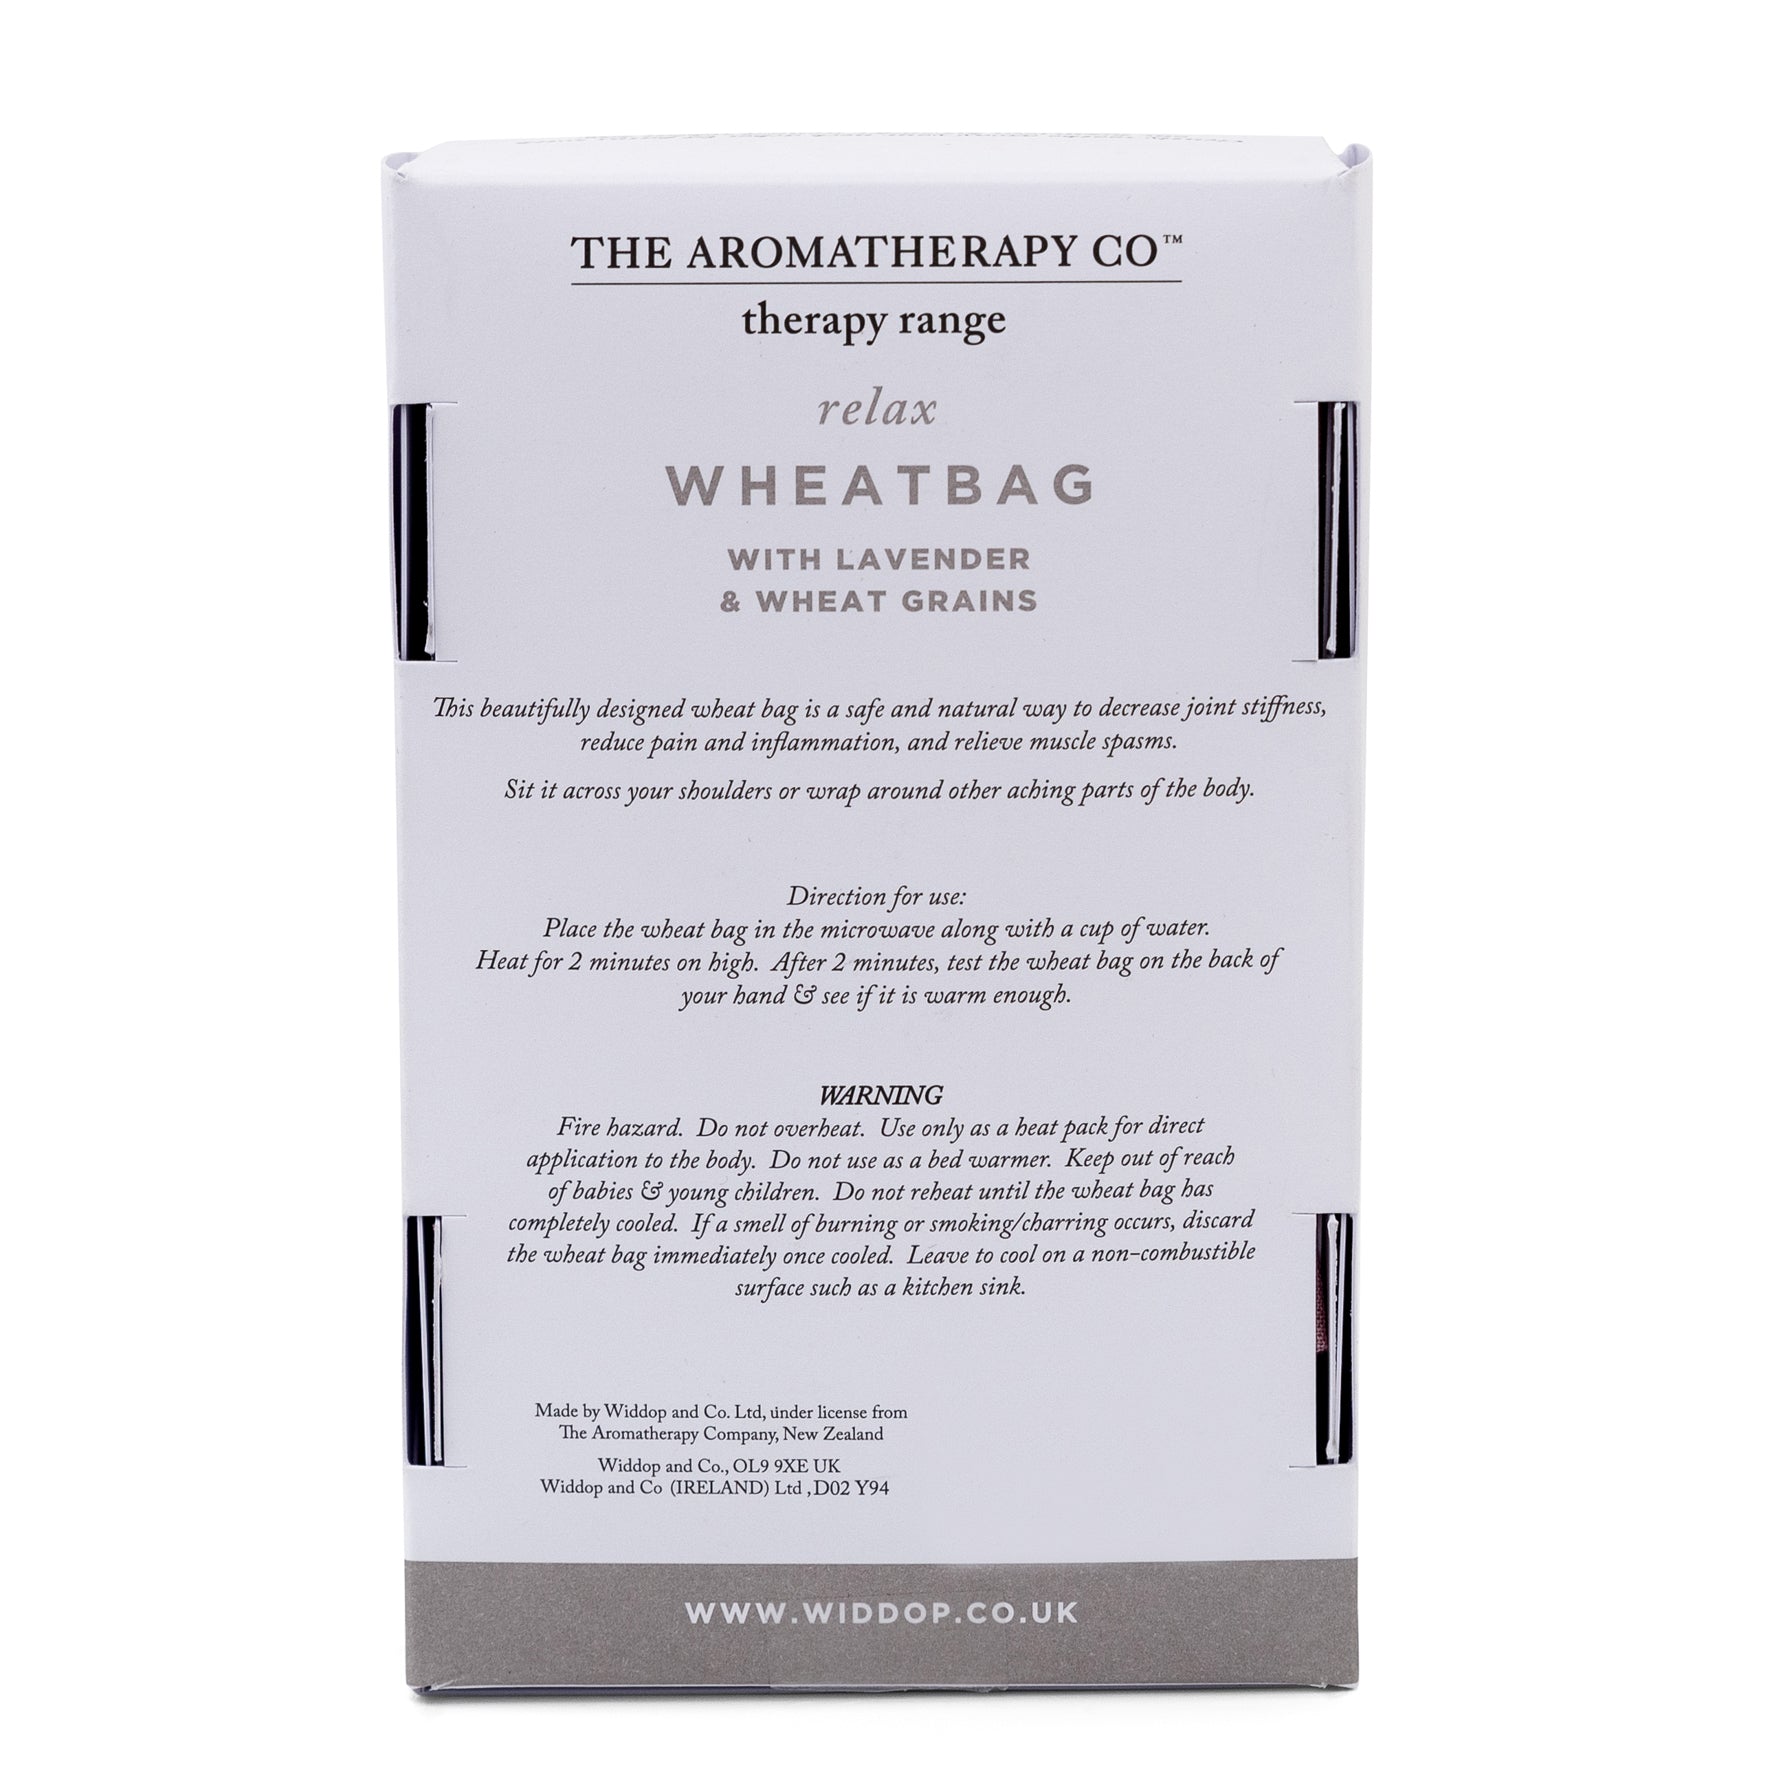 The Aromatherapy Co Soothing Wheat Bag With Lavender and Wheat Grains